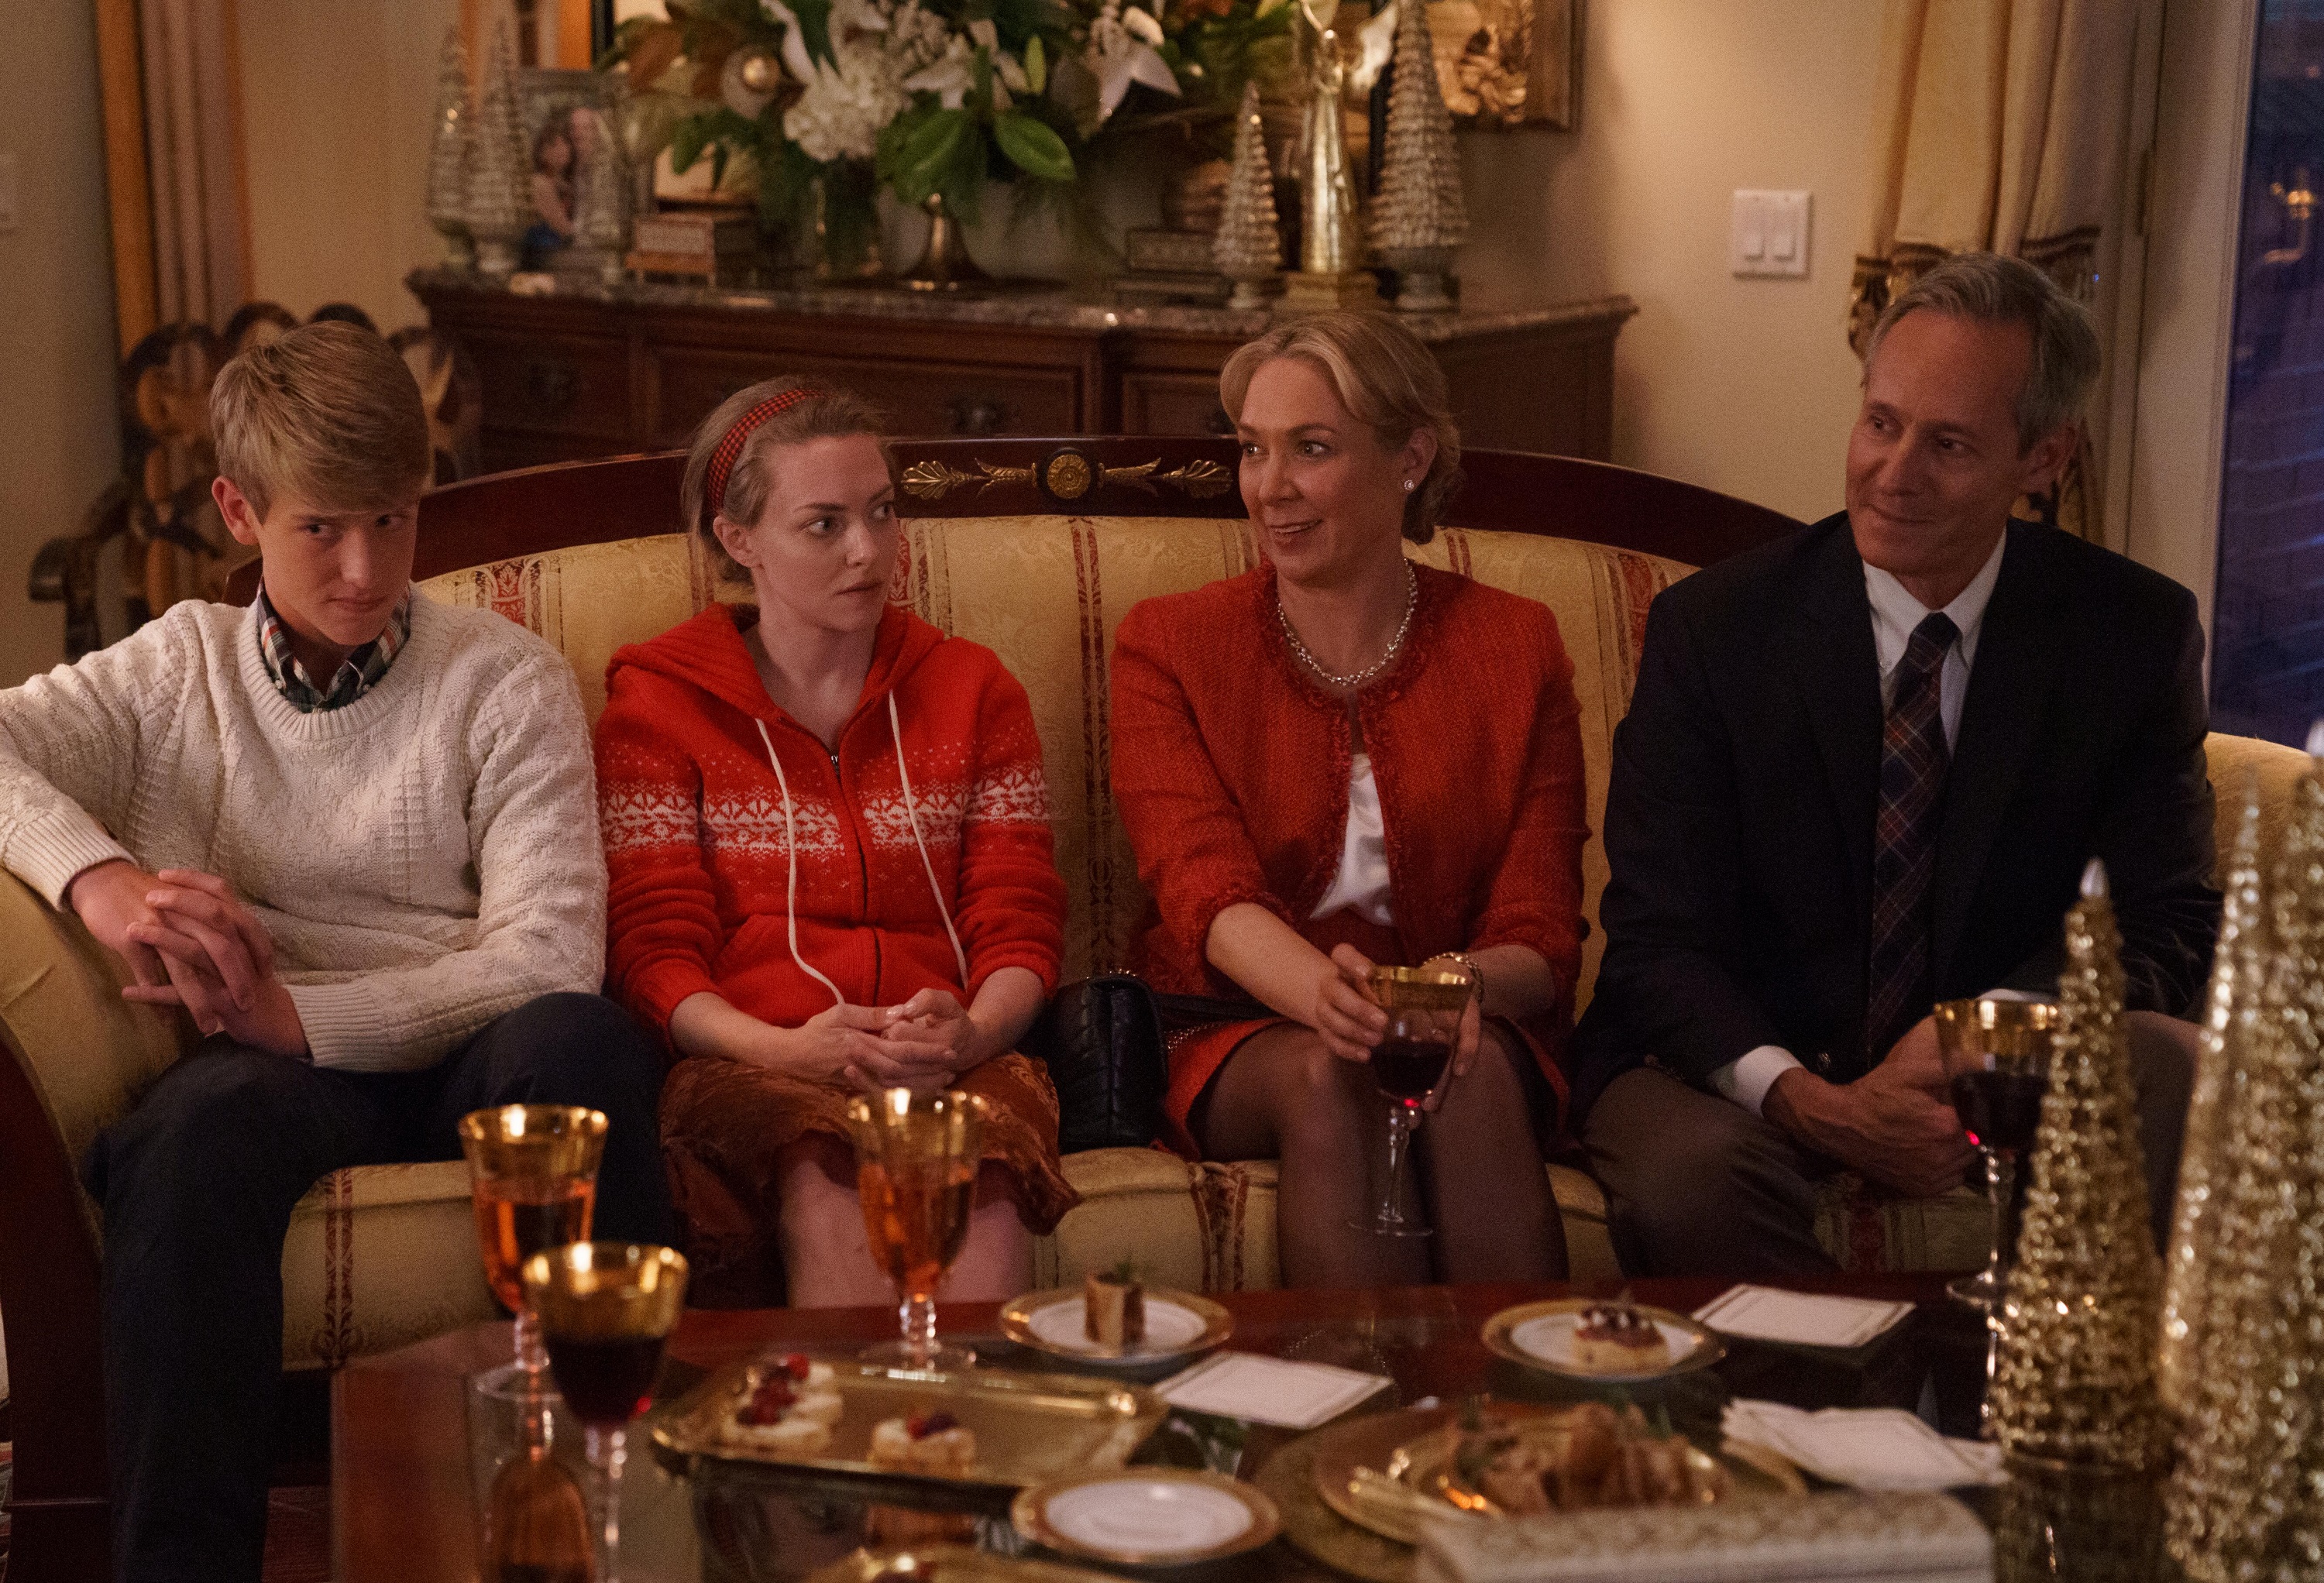 Jake Satow as Christian Holmes, Amanda Seyfried as Elizabeth Holmes, Elizabeth Marvel as Noel Holmes and Michel Gill as Chris Holmes in 'The Dropout' cast sitting together on a couch